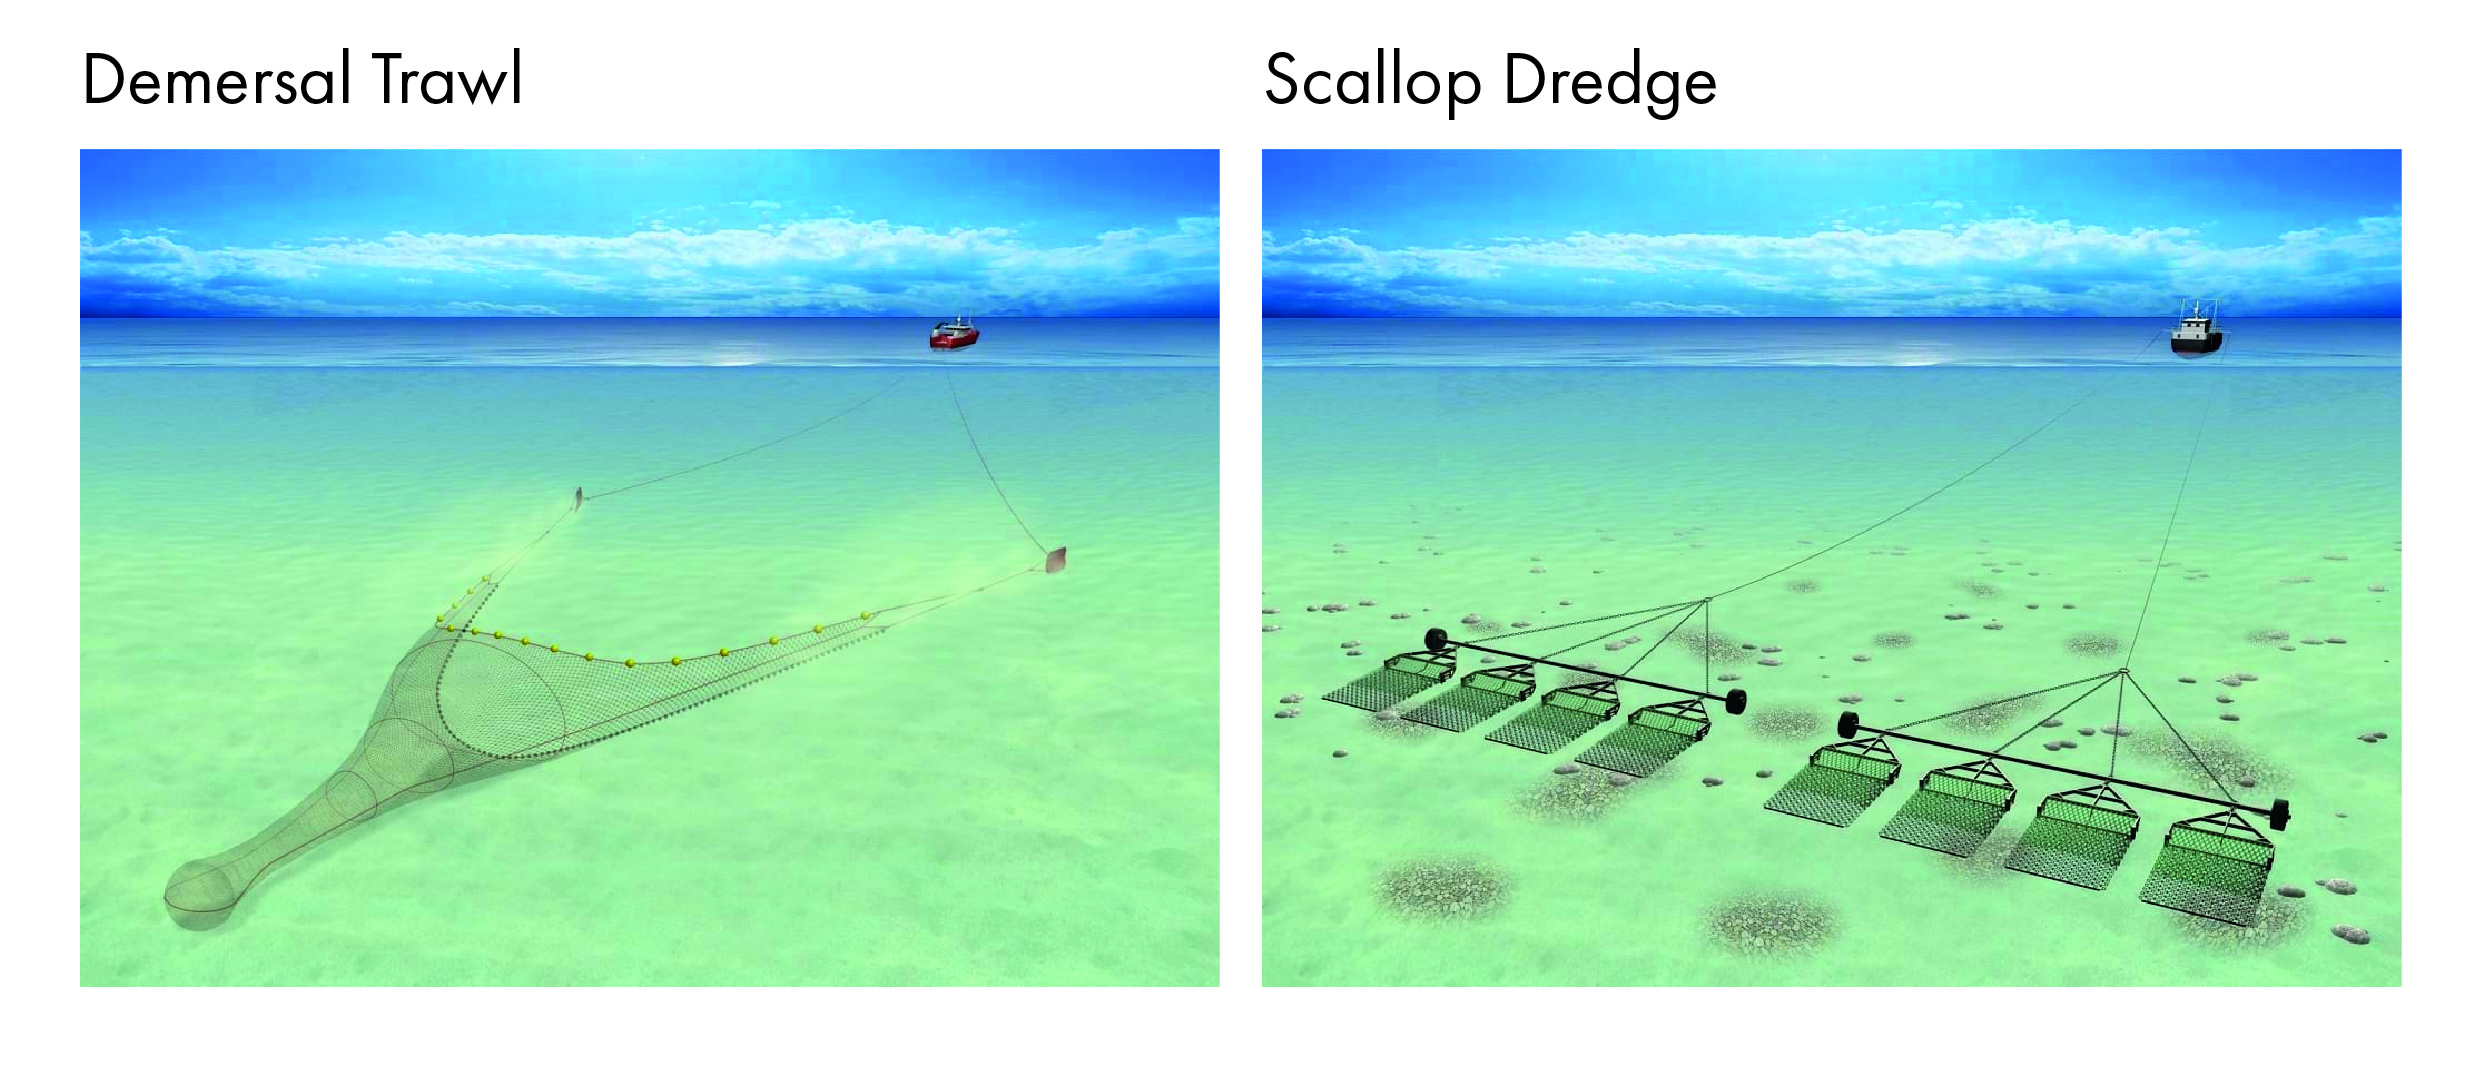 Schematic images of types of two types of mobile-fishing equipment - demersal trawl and scallop dredge